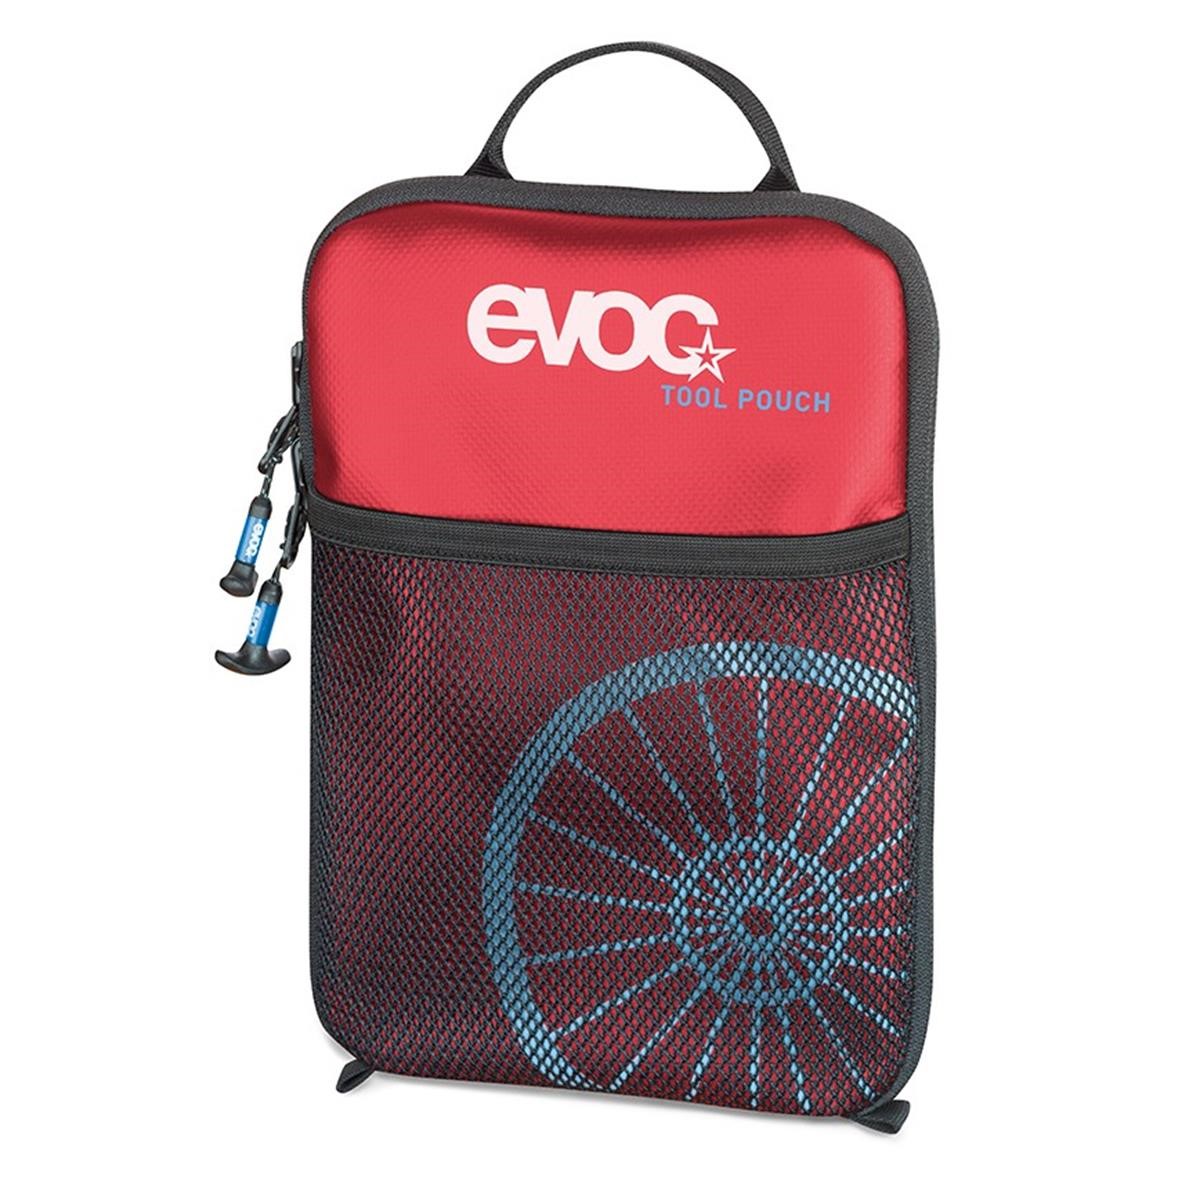 Evoc Tool Pouch Red - 1 Liter